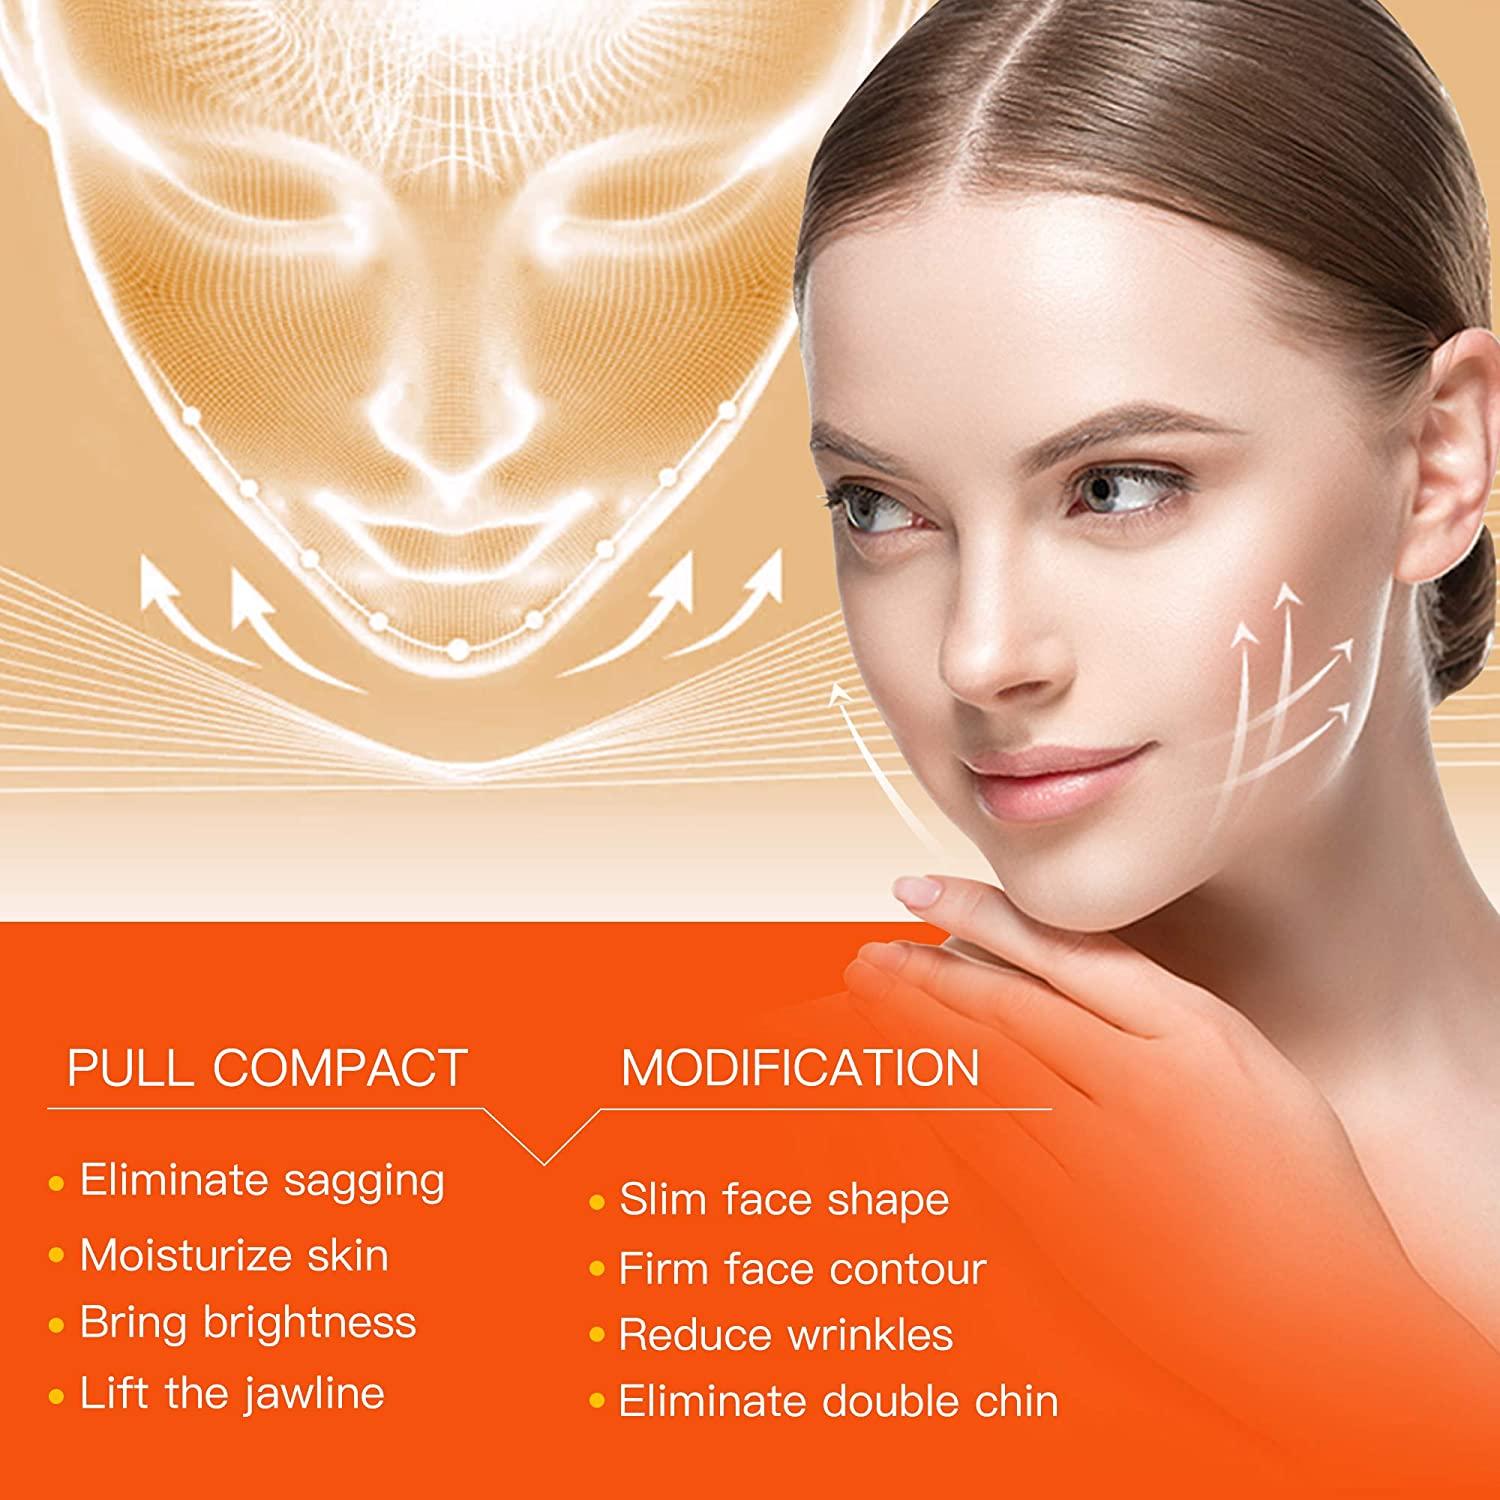 V FACE SHAPER Lift UP Mask Cheek Slimming Reduce Double Chin Anti Wrinkle  $5.38 - PicClick AU